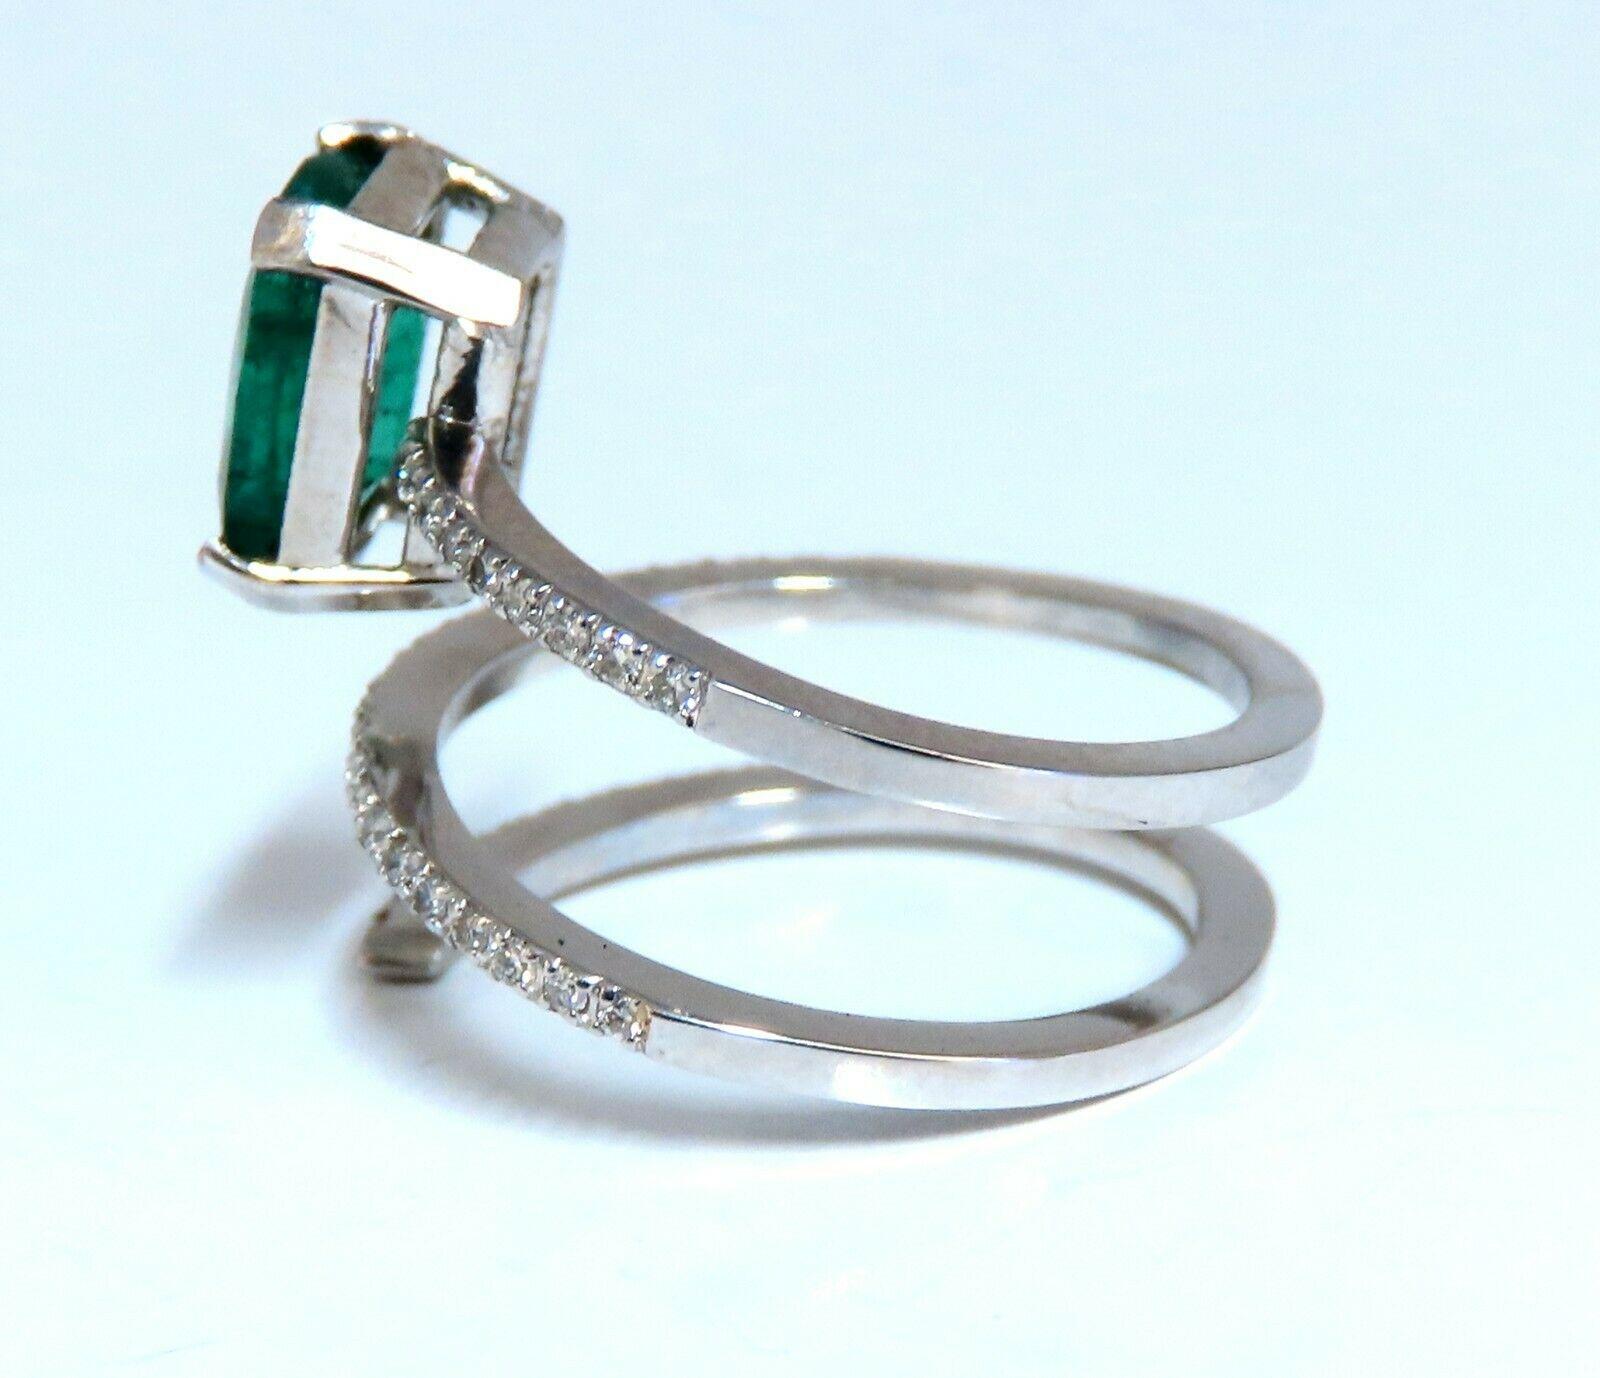 Mod Forest Snake Swirl Green.

1.60ct. Natural Emerald Ring

Emerald, Emerald cut

8.5 x 6.7mm Diameter

Transparent & Vivid Green 

.60ct. Diamonds.

Round & full cuts 

G-color Vs-2 clarity.  

14kt. white gold

4.1 grams

Ring Current size: 6-7